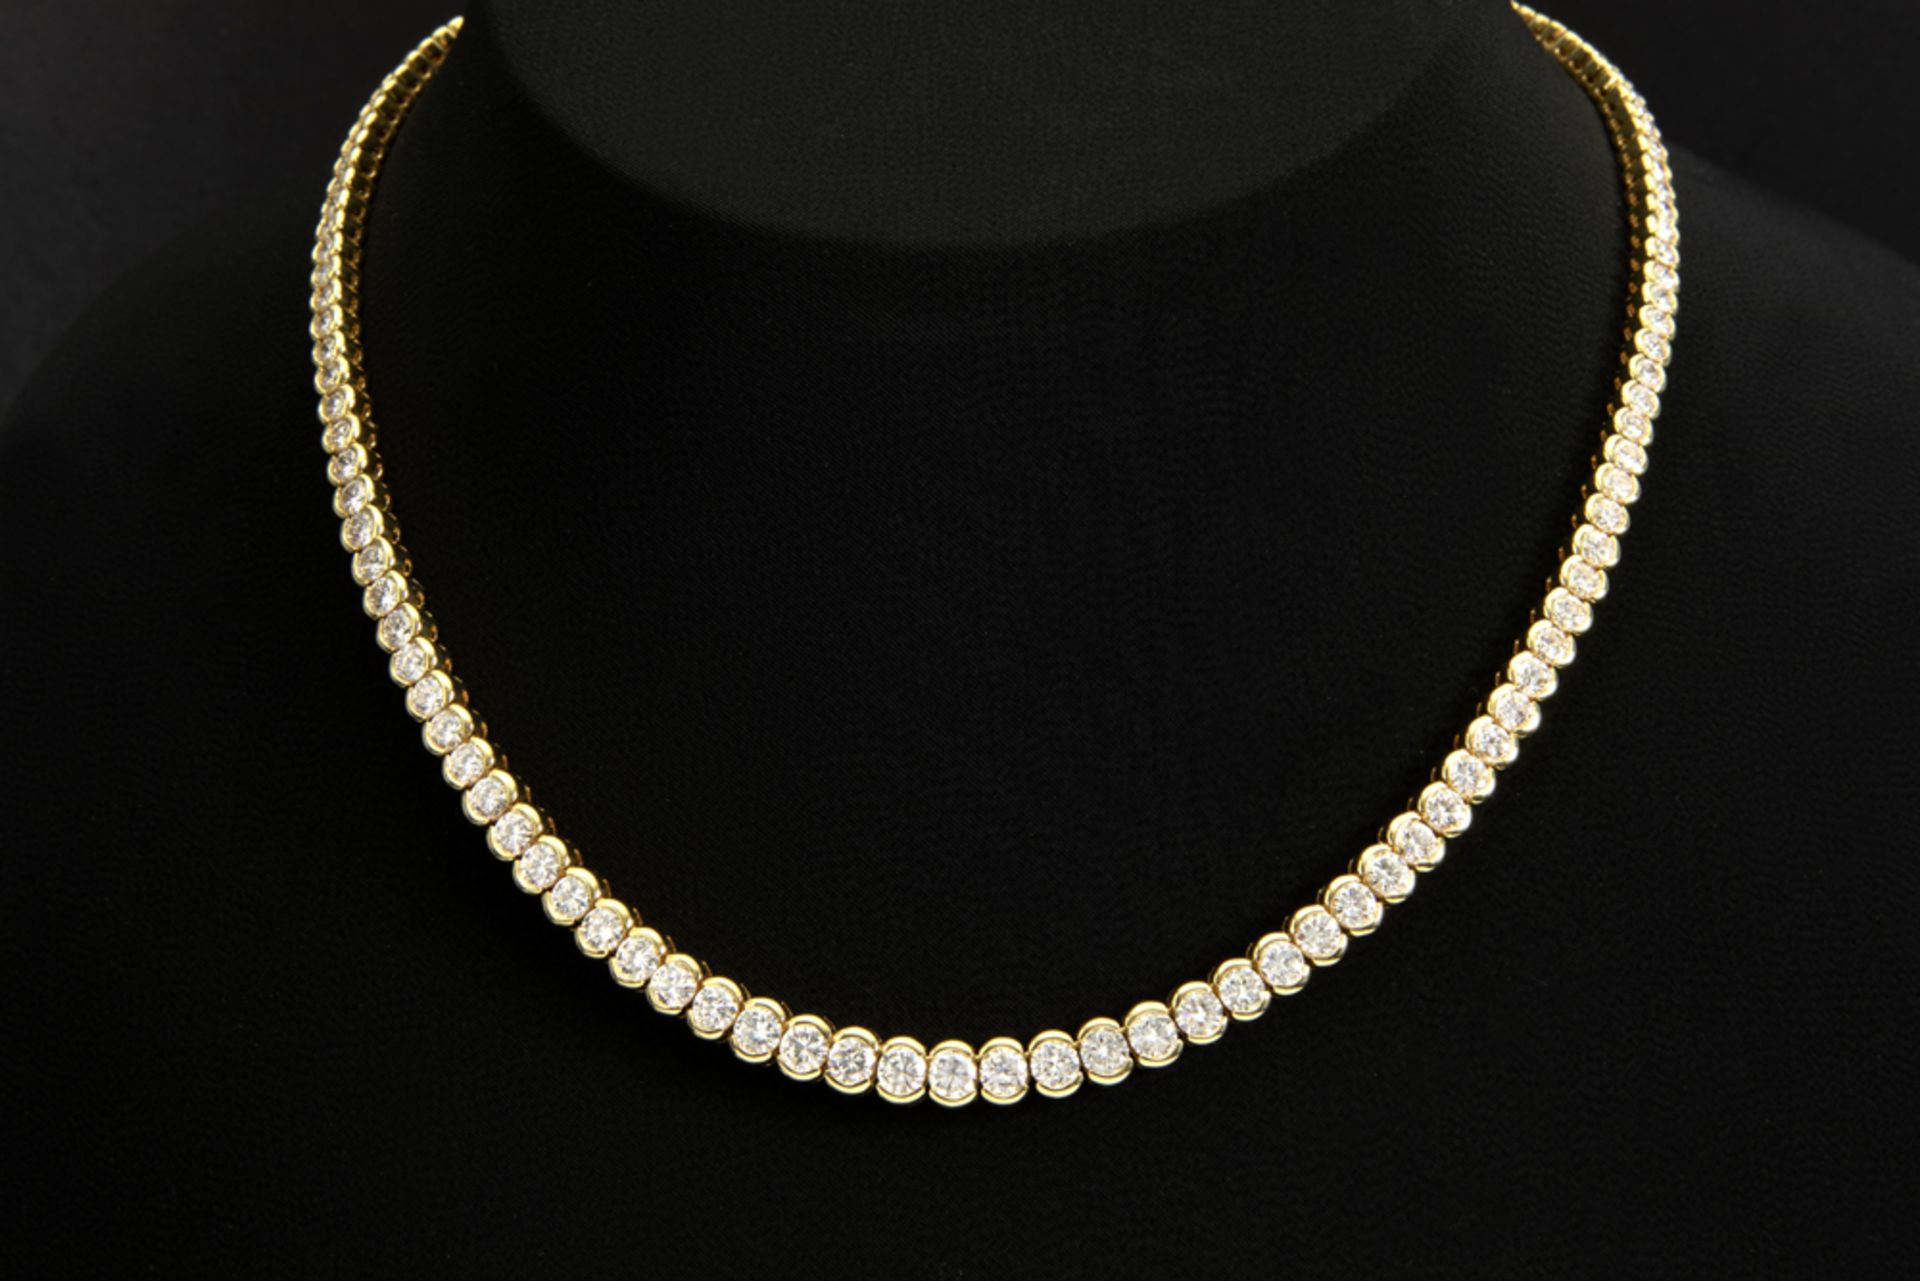 superb necklace in yellow gold (18 carat) with at least 12 carat of very high quality brilliant